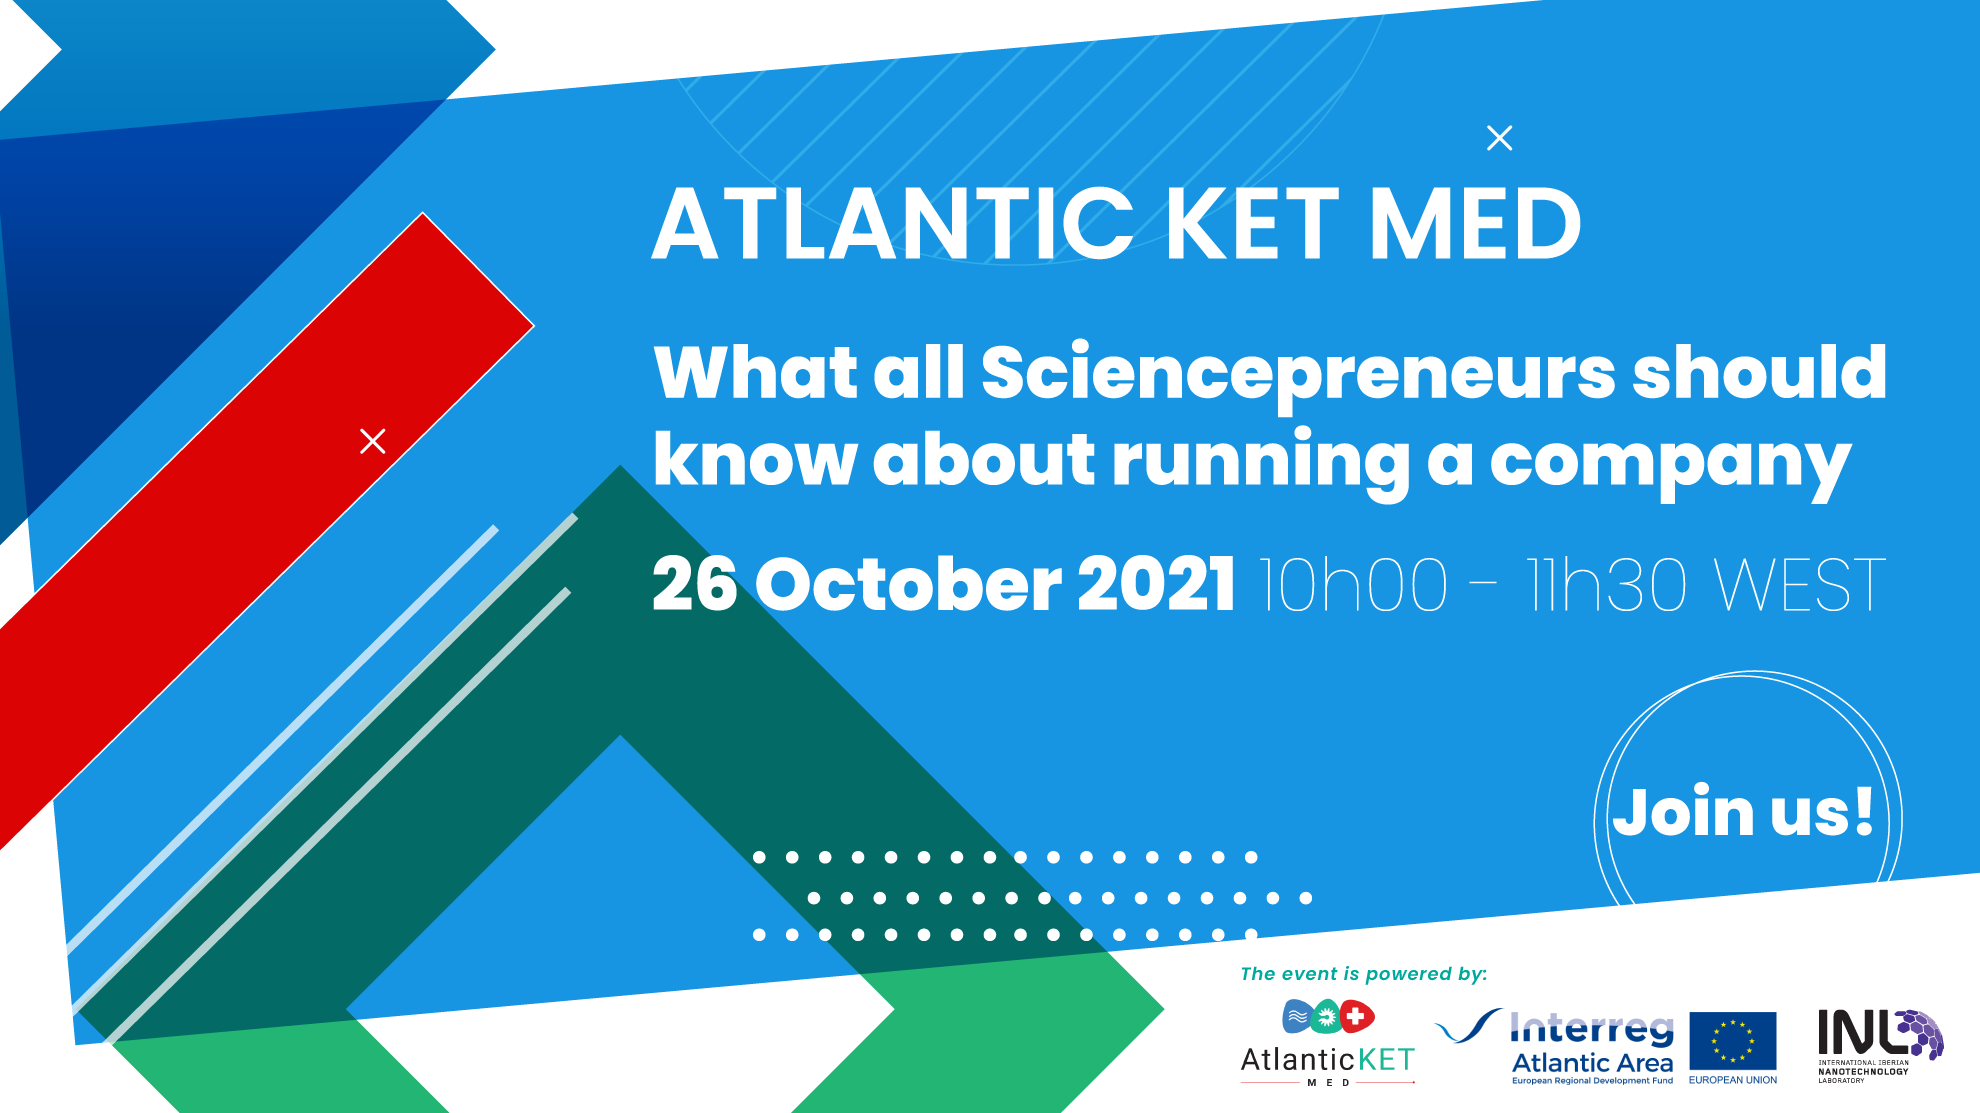 Webinar ‘What all Sciencepreneurs should know about running a company’